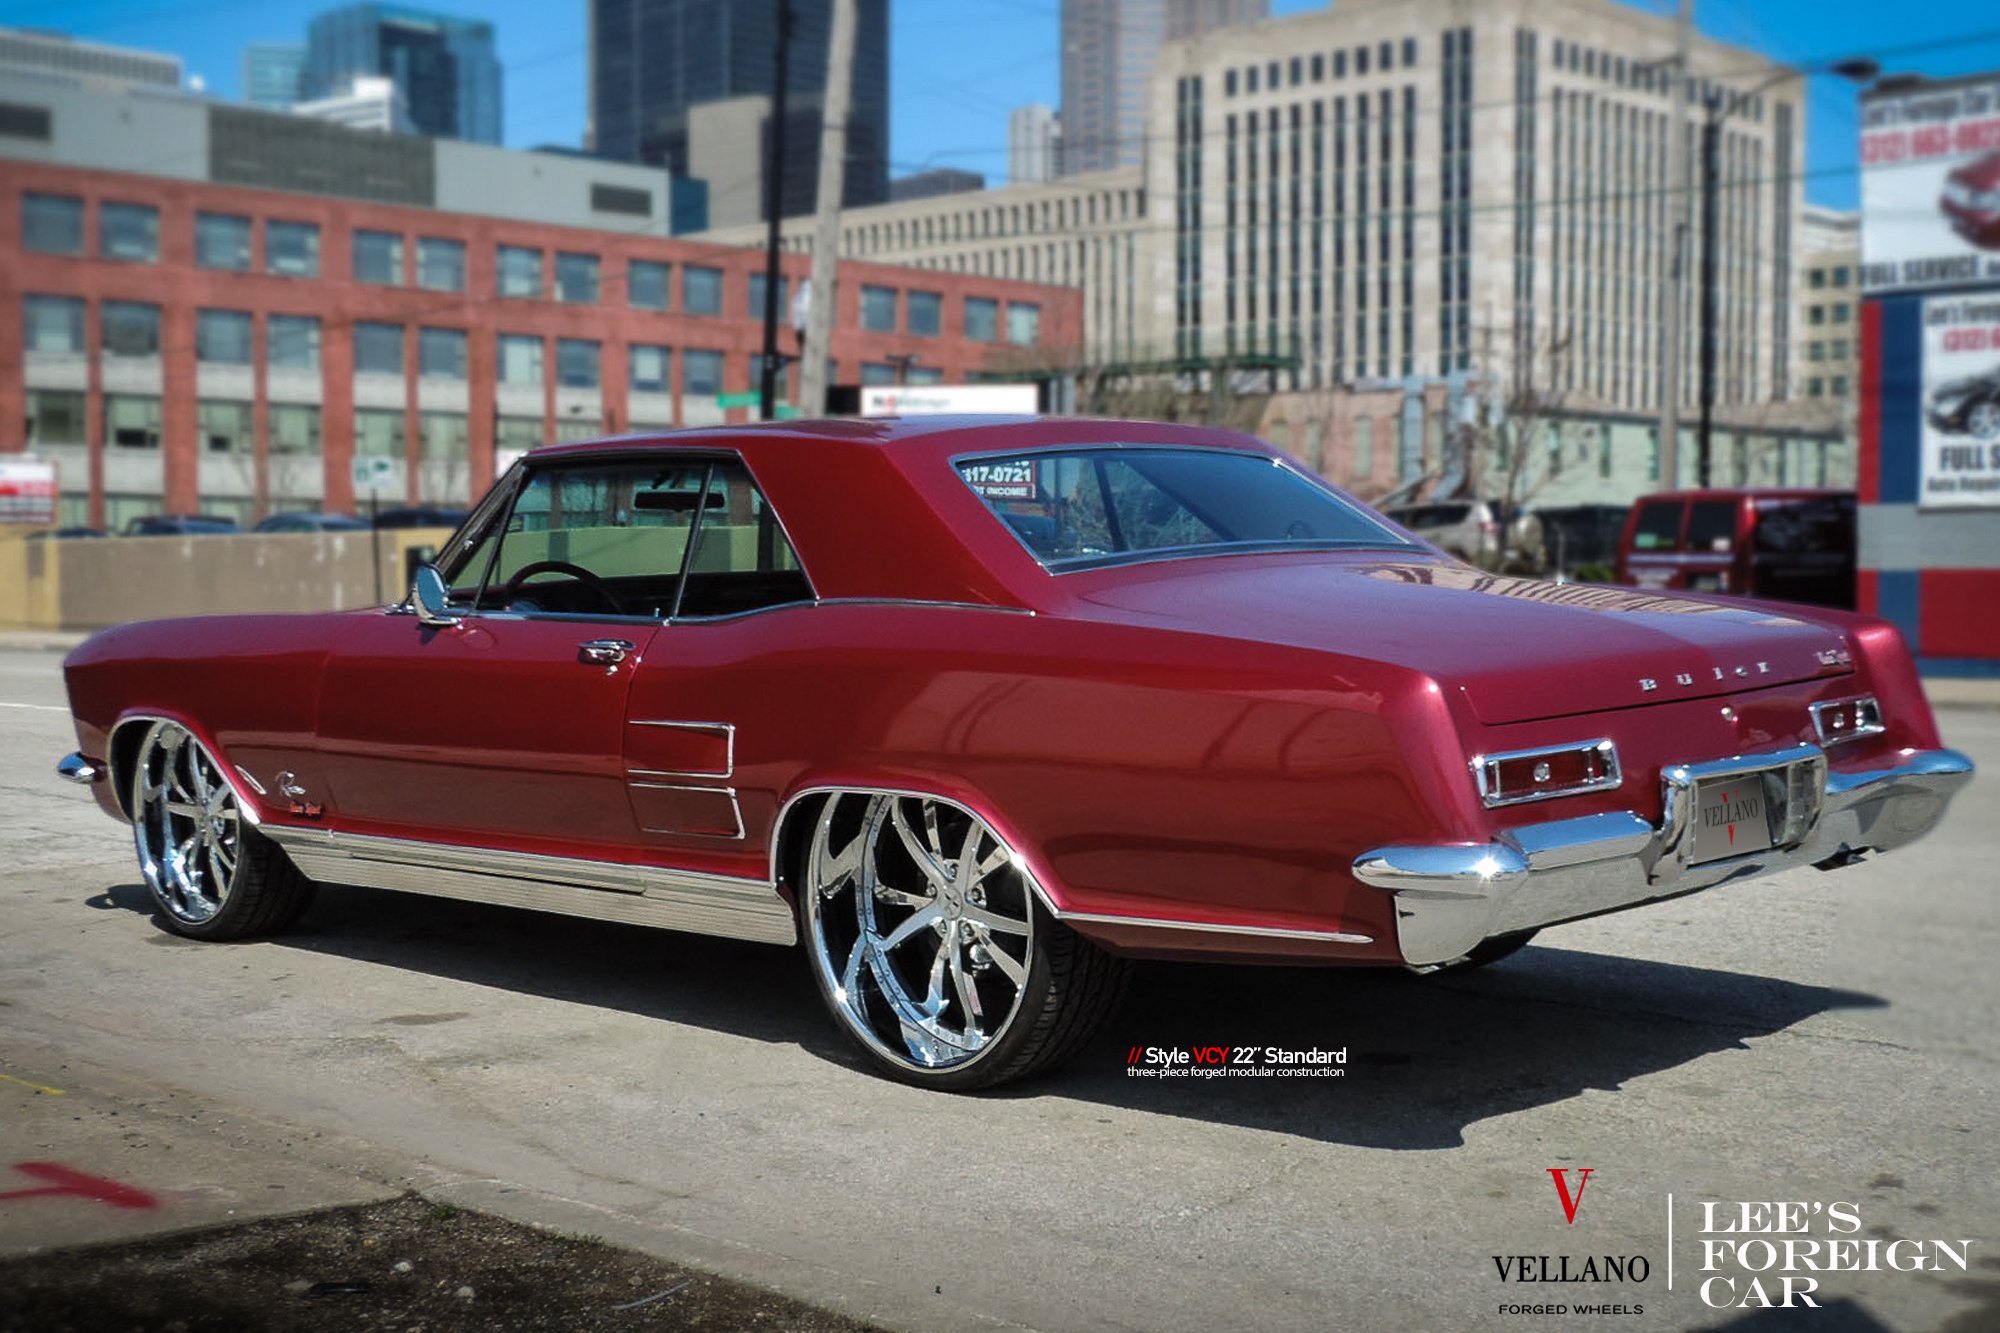 Chrome Rear Bumper on Red Buick Riviera - Photo by Vellano